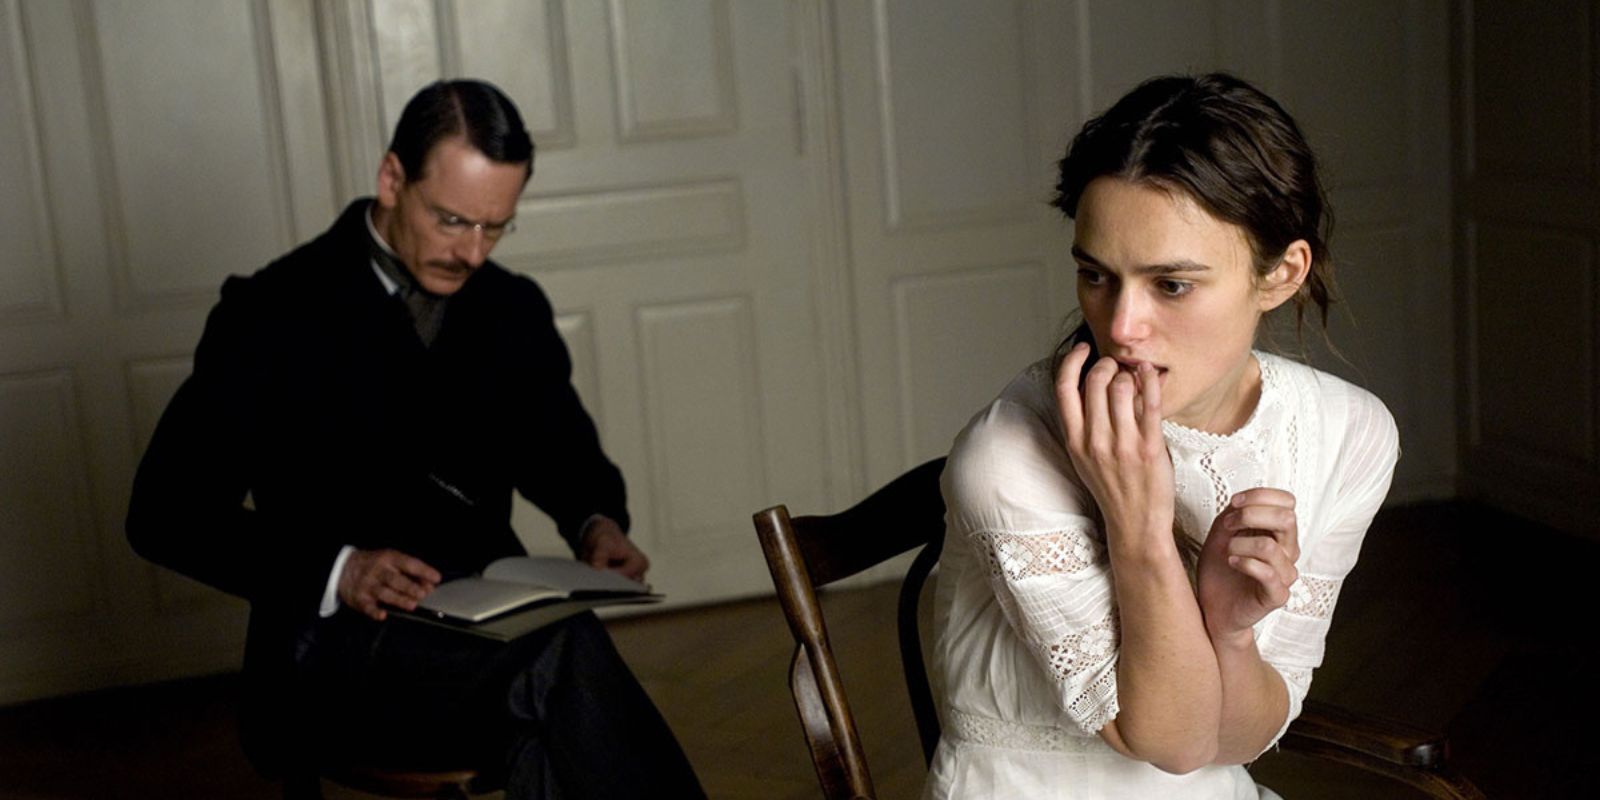 Michael Fassbender and Keira Knightley in A Dangerous Method